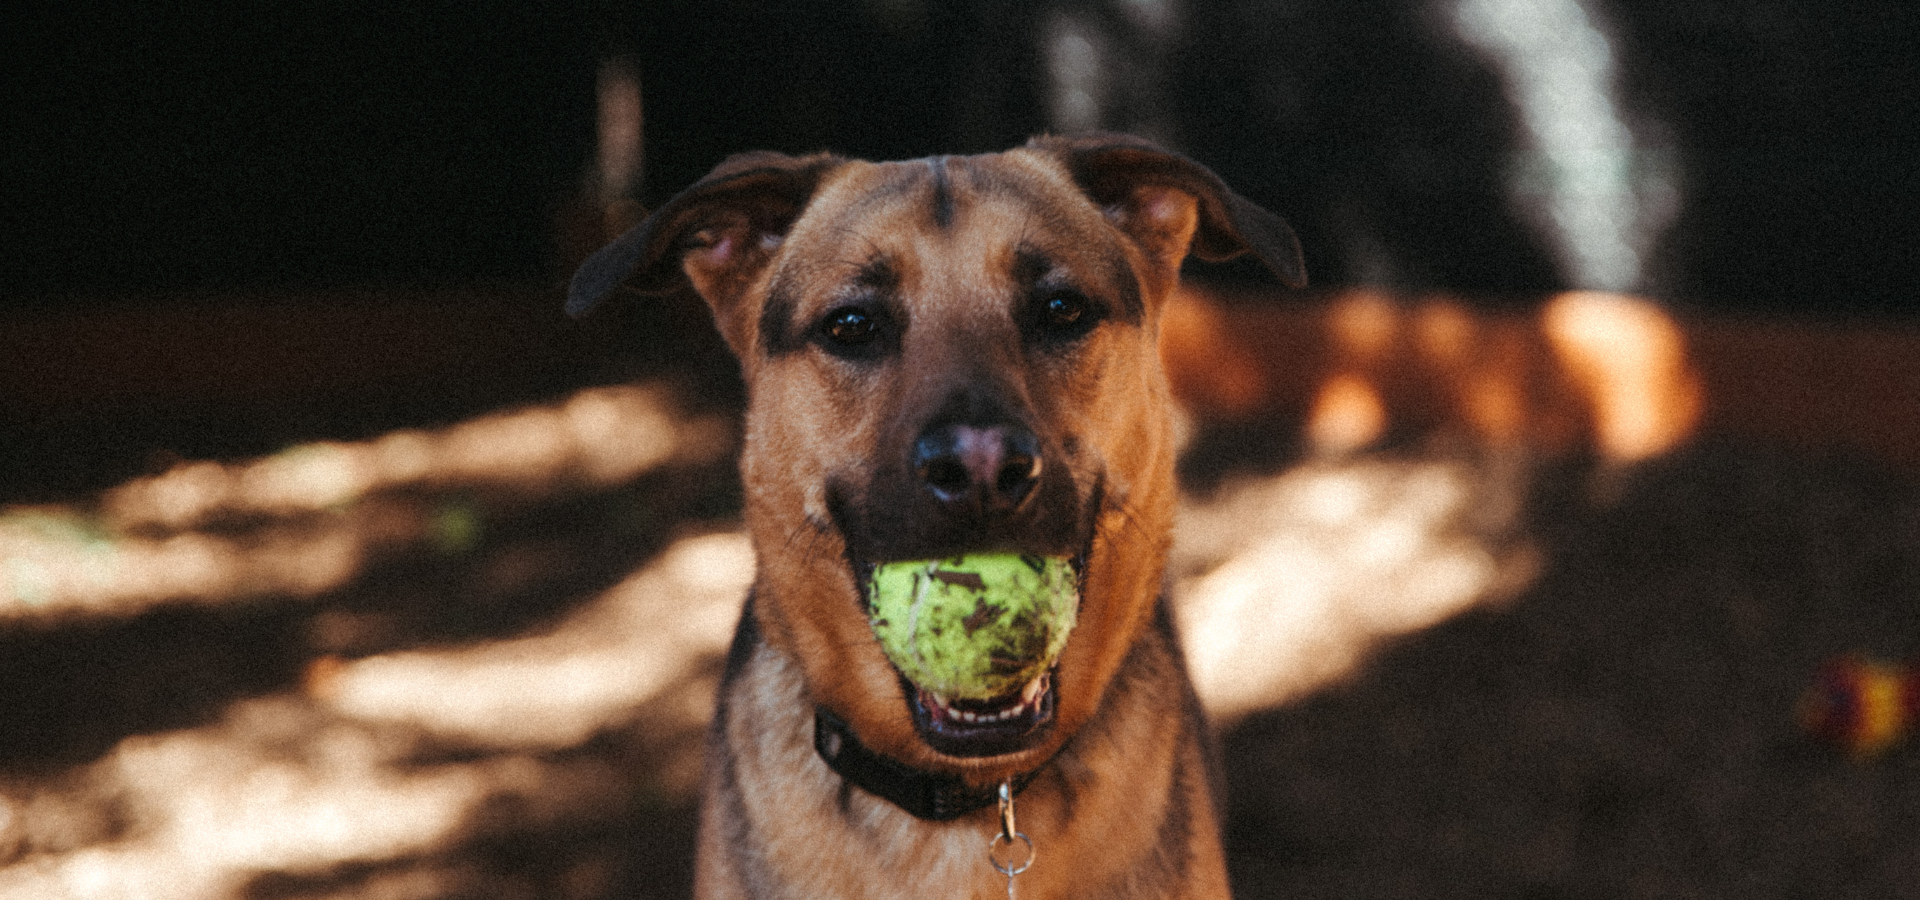 Sheperd mix shelter dog looking at camera with tennis ball in mouth